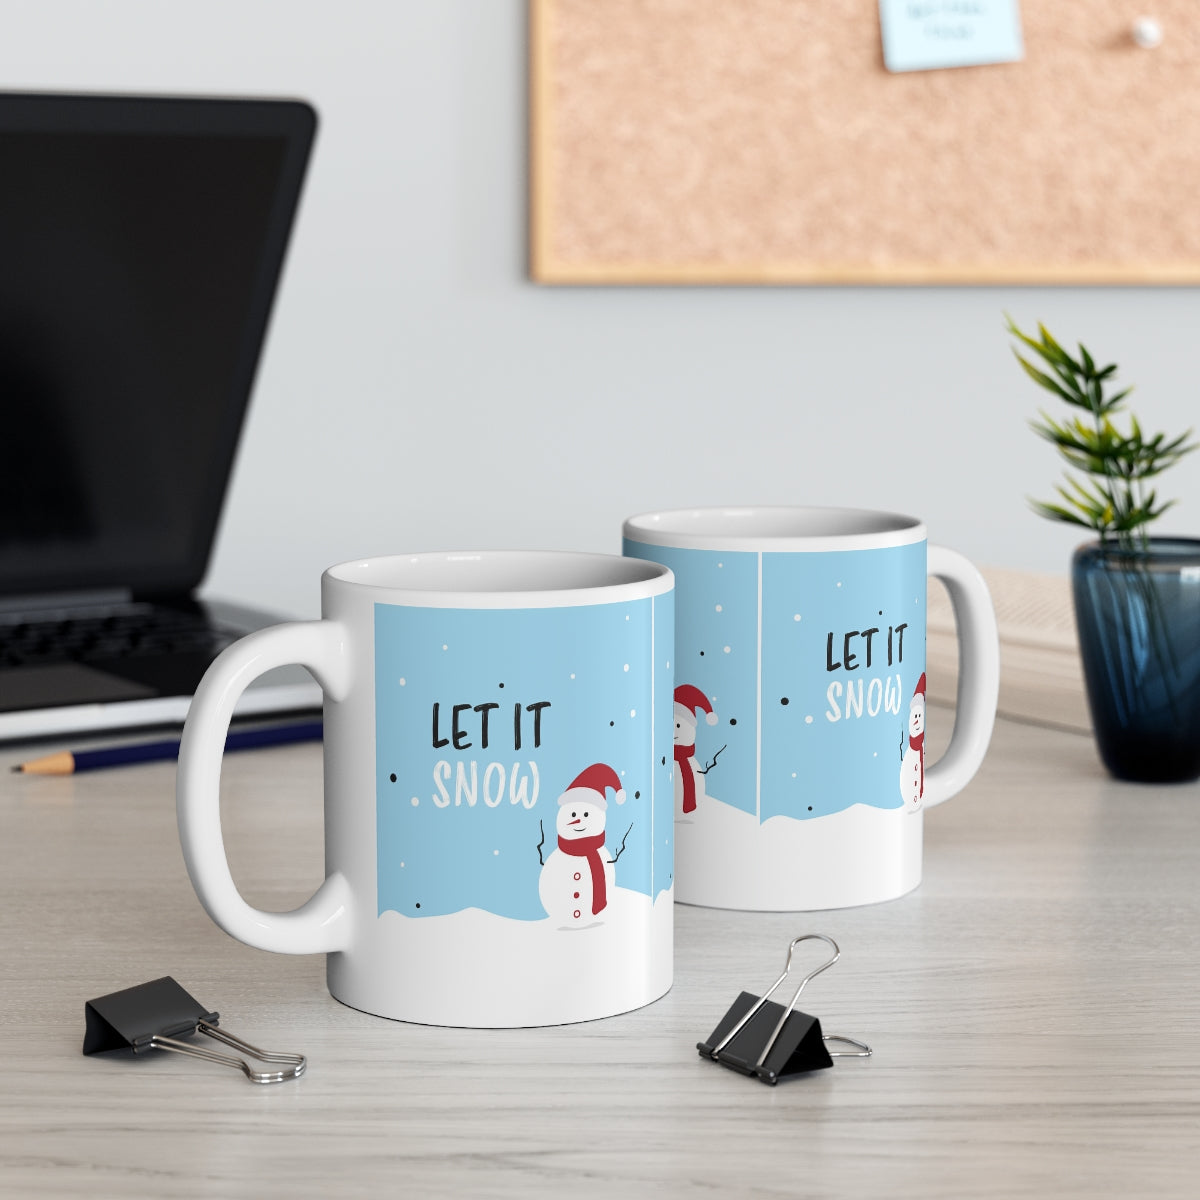 Mock up of two mugs on a surface near a computer